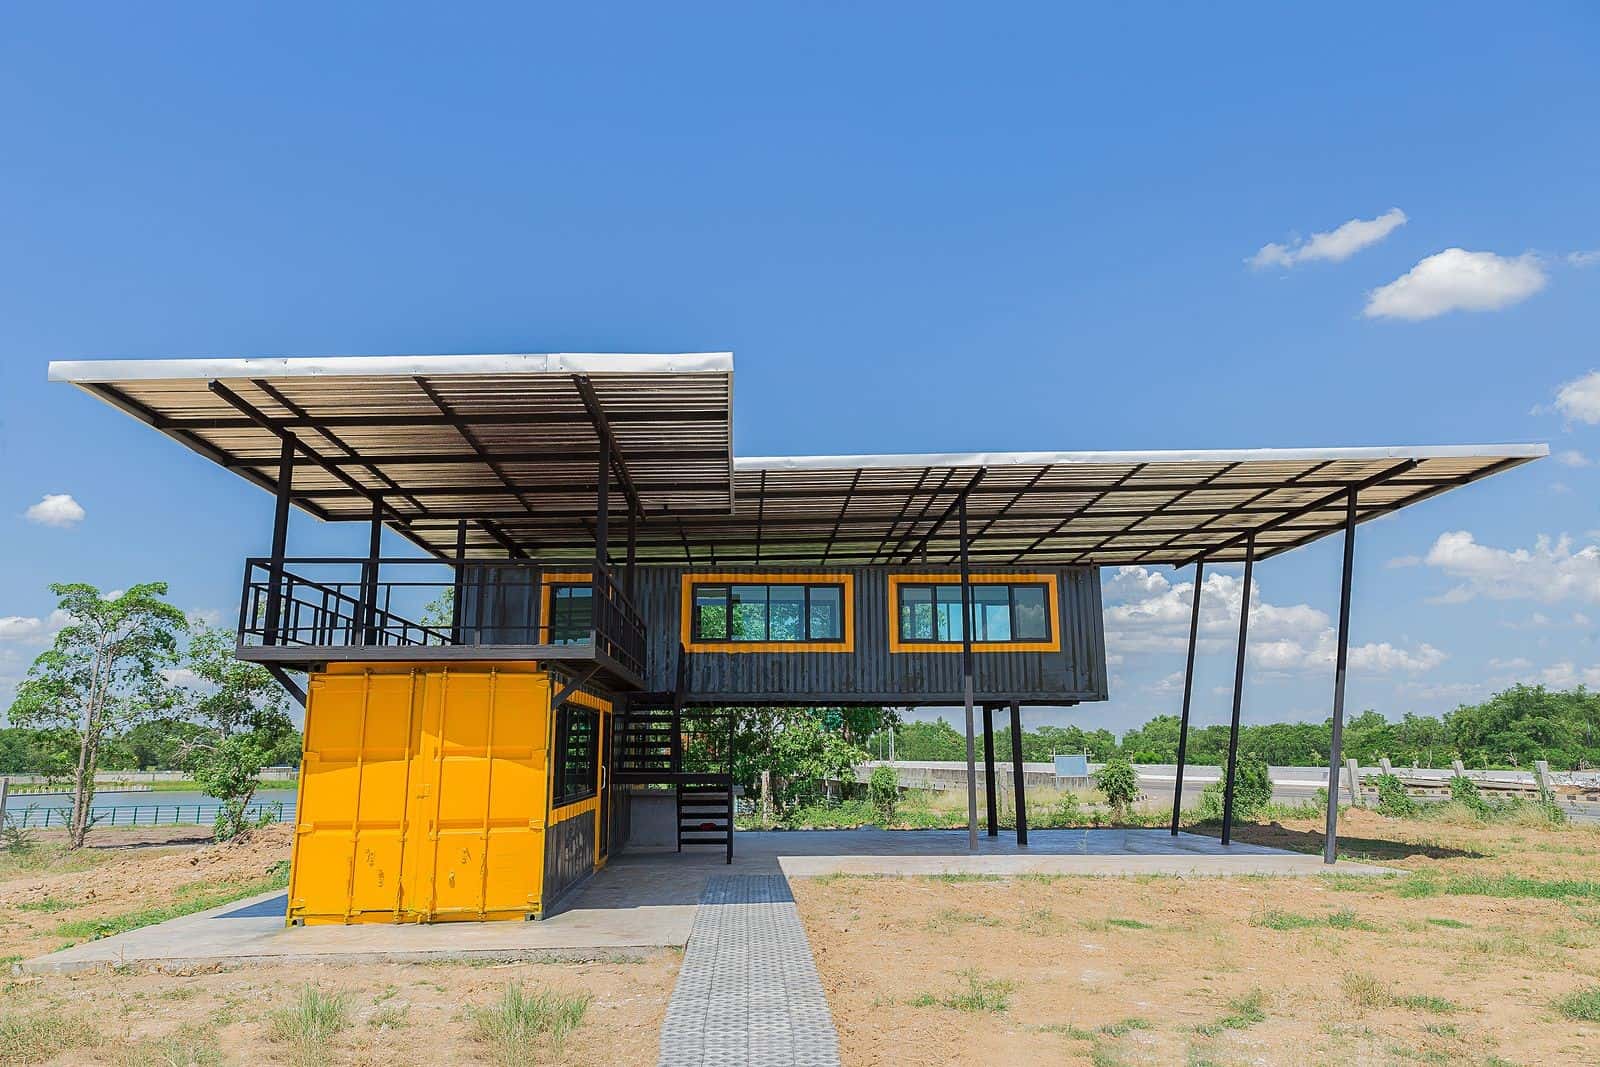 Shipping Containers for Sale are Cheaper Than More Traditional Homes